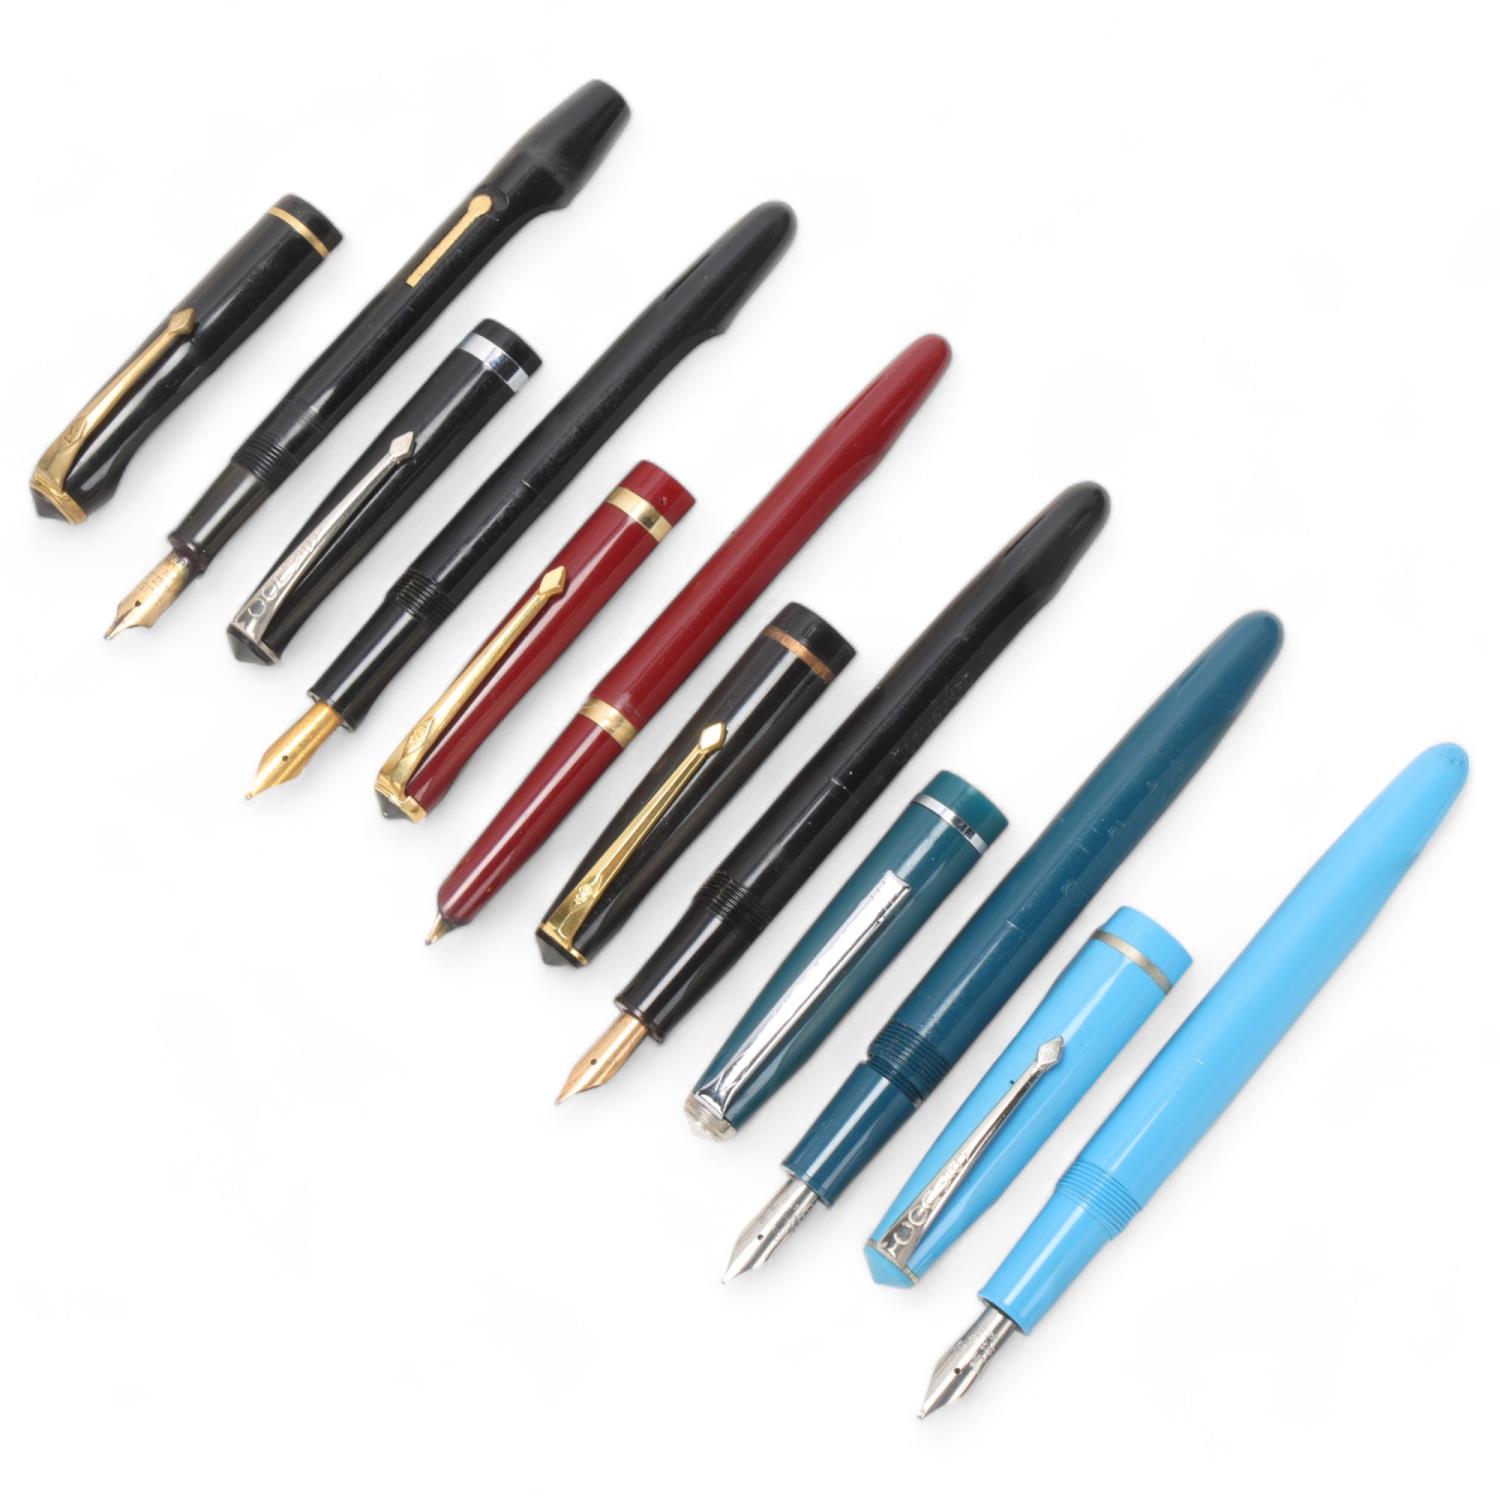 6 vintage Conway Stewart fountain pens, including Model 150, "Relief" No12 lever fill, red 106,